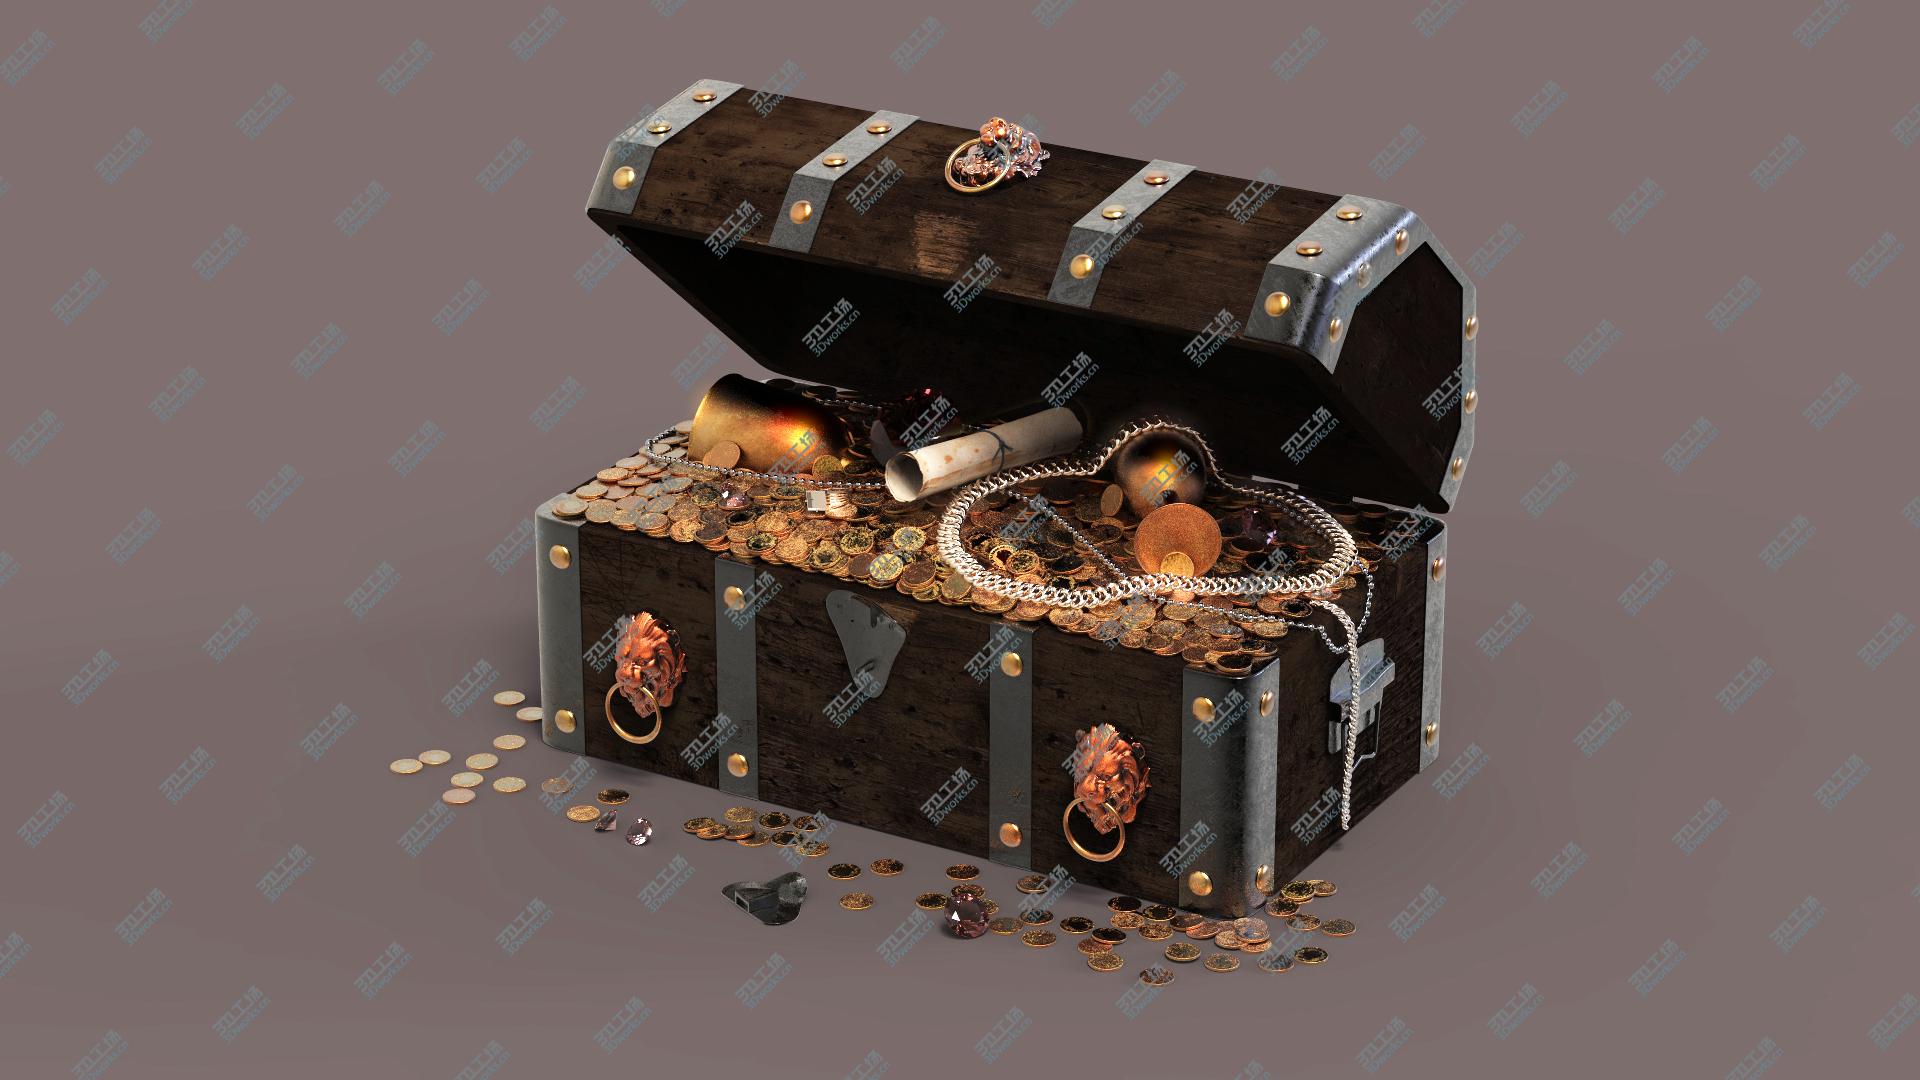 images/goods_img/202104093/3D Chest Treasure With Loot model/1.jpg